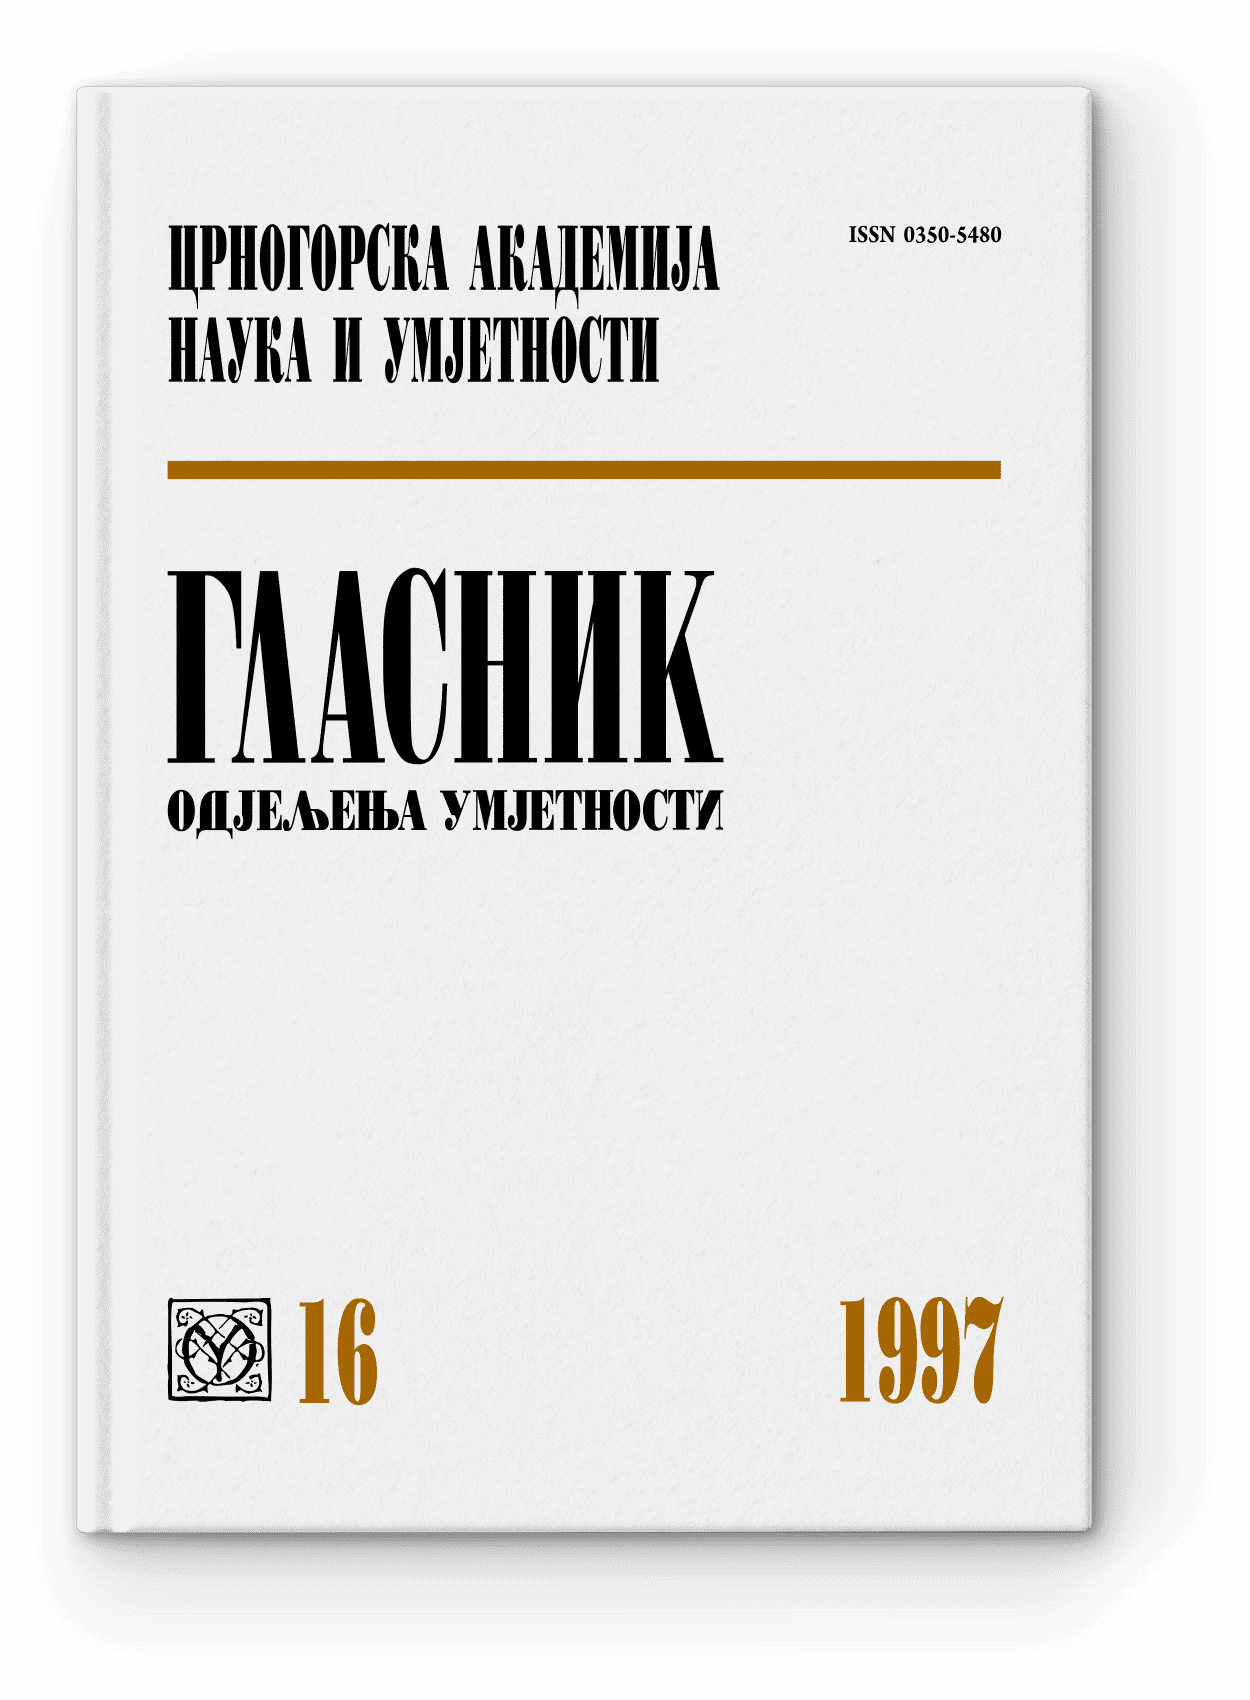 Proceedings of the Department of Arts, 16/1997